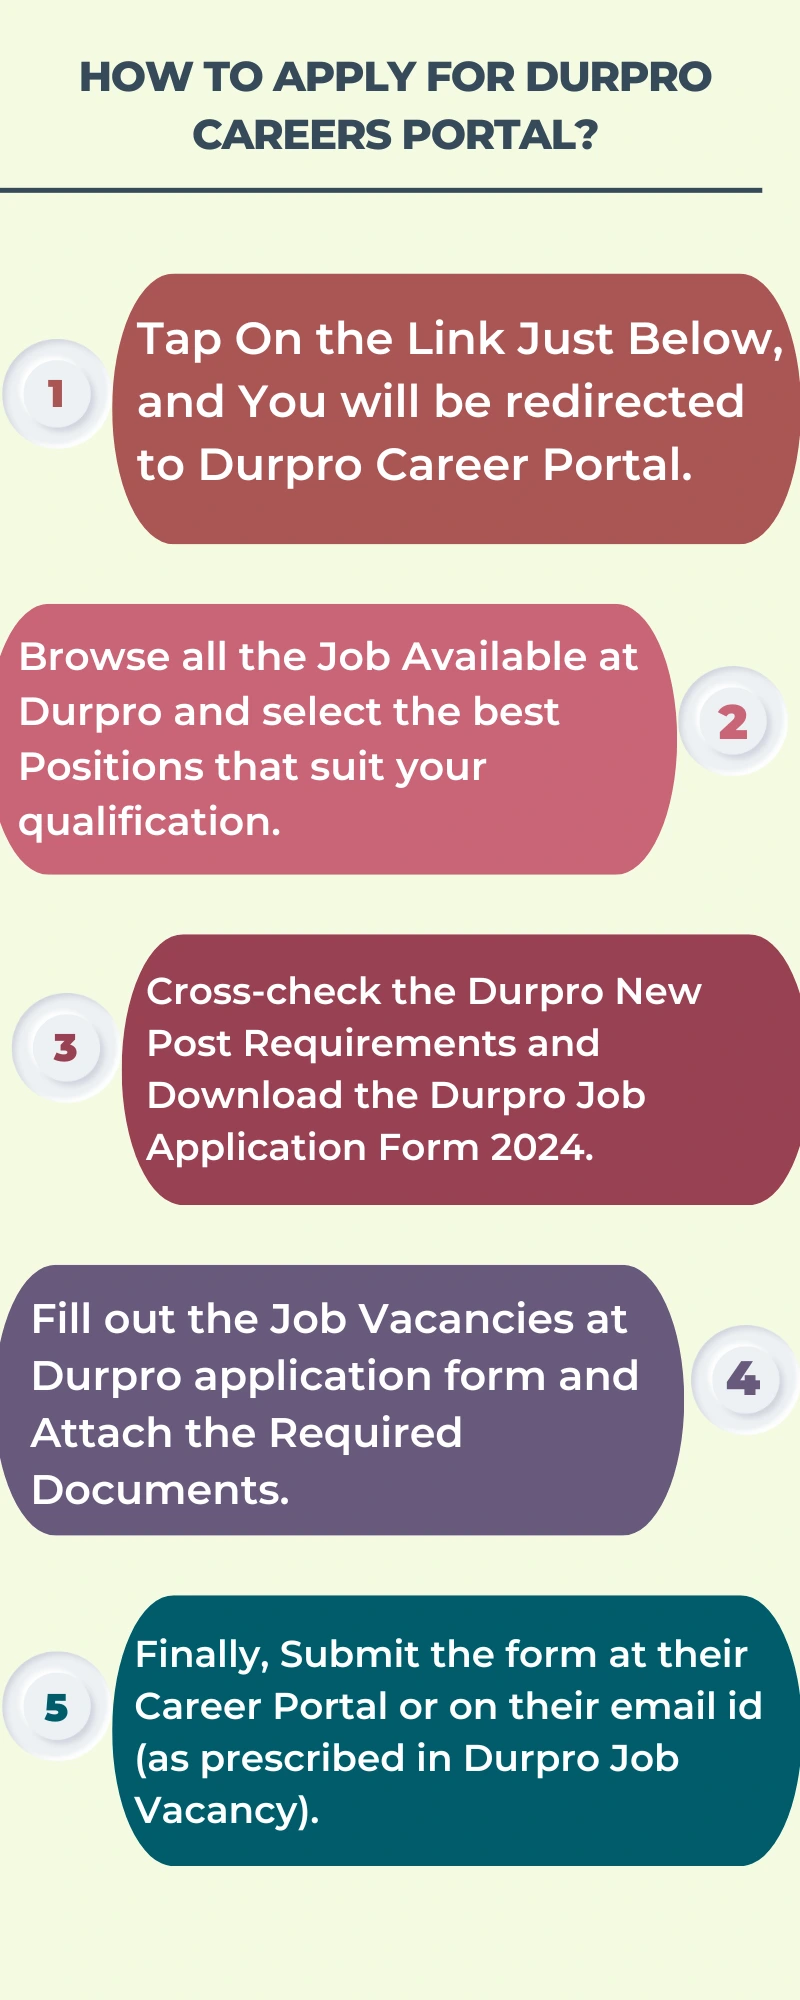 How To Apply for Durpro Careers Portal?